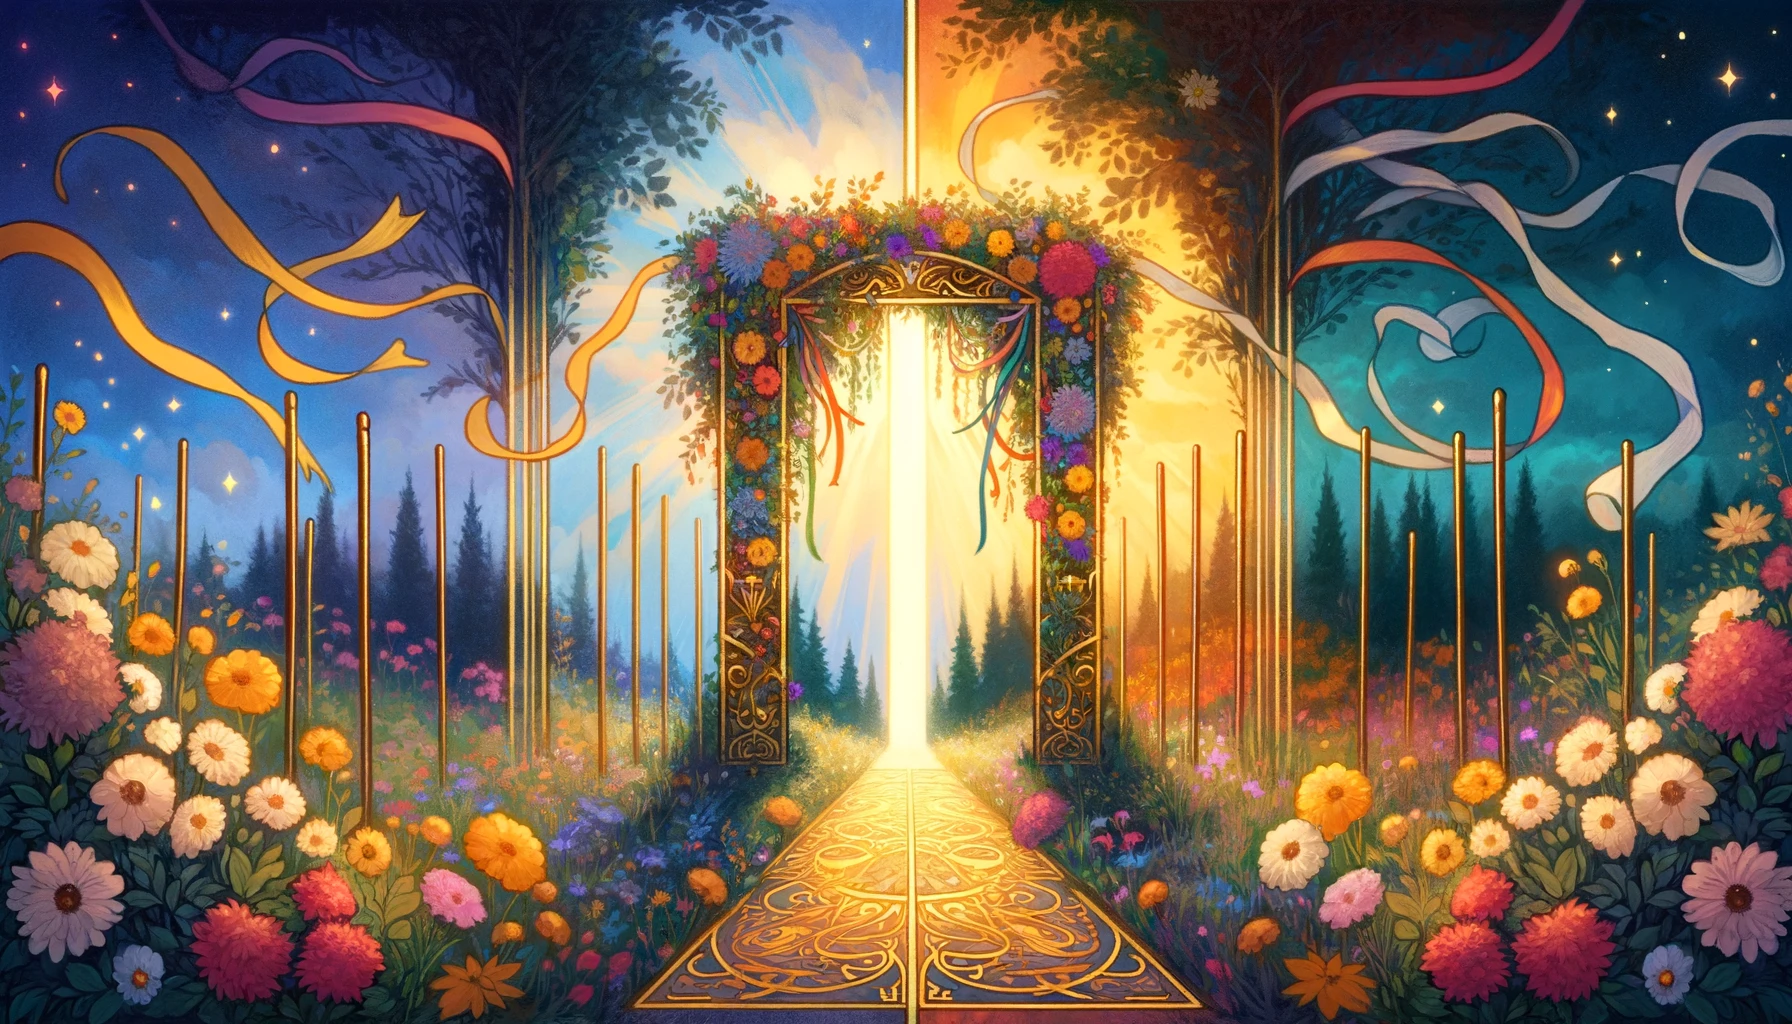 A split image displaying contrasting outcomes in a tarot reading: on one side, vibrant celebrations and fulfillment symbolize a positive "Yes" answer, while on the other side, a subdued scene hints at missed opportunities despite the absence of the card's positive energy, emphasizing the duality of outcomes and potential for growth.